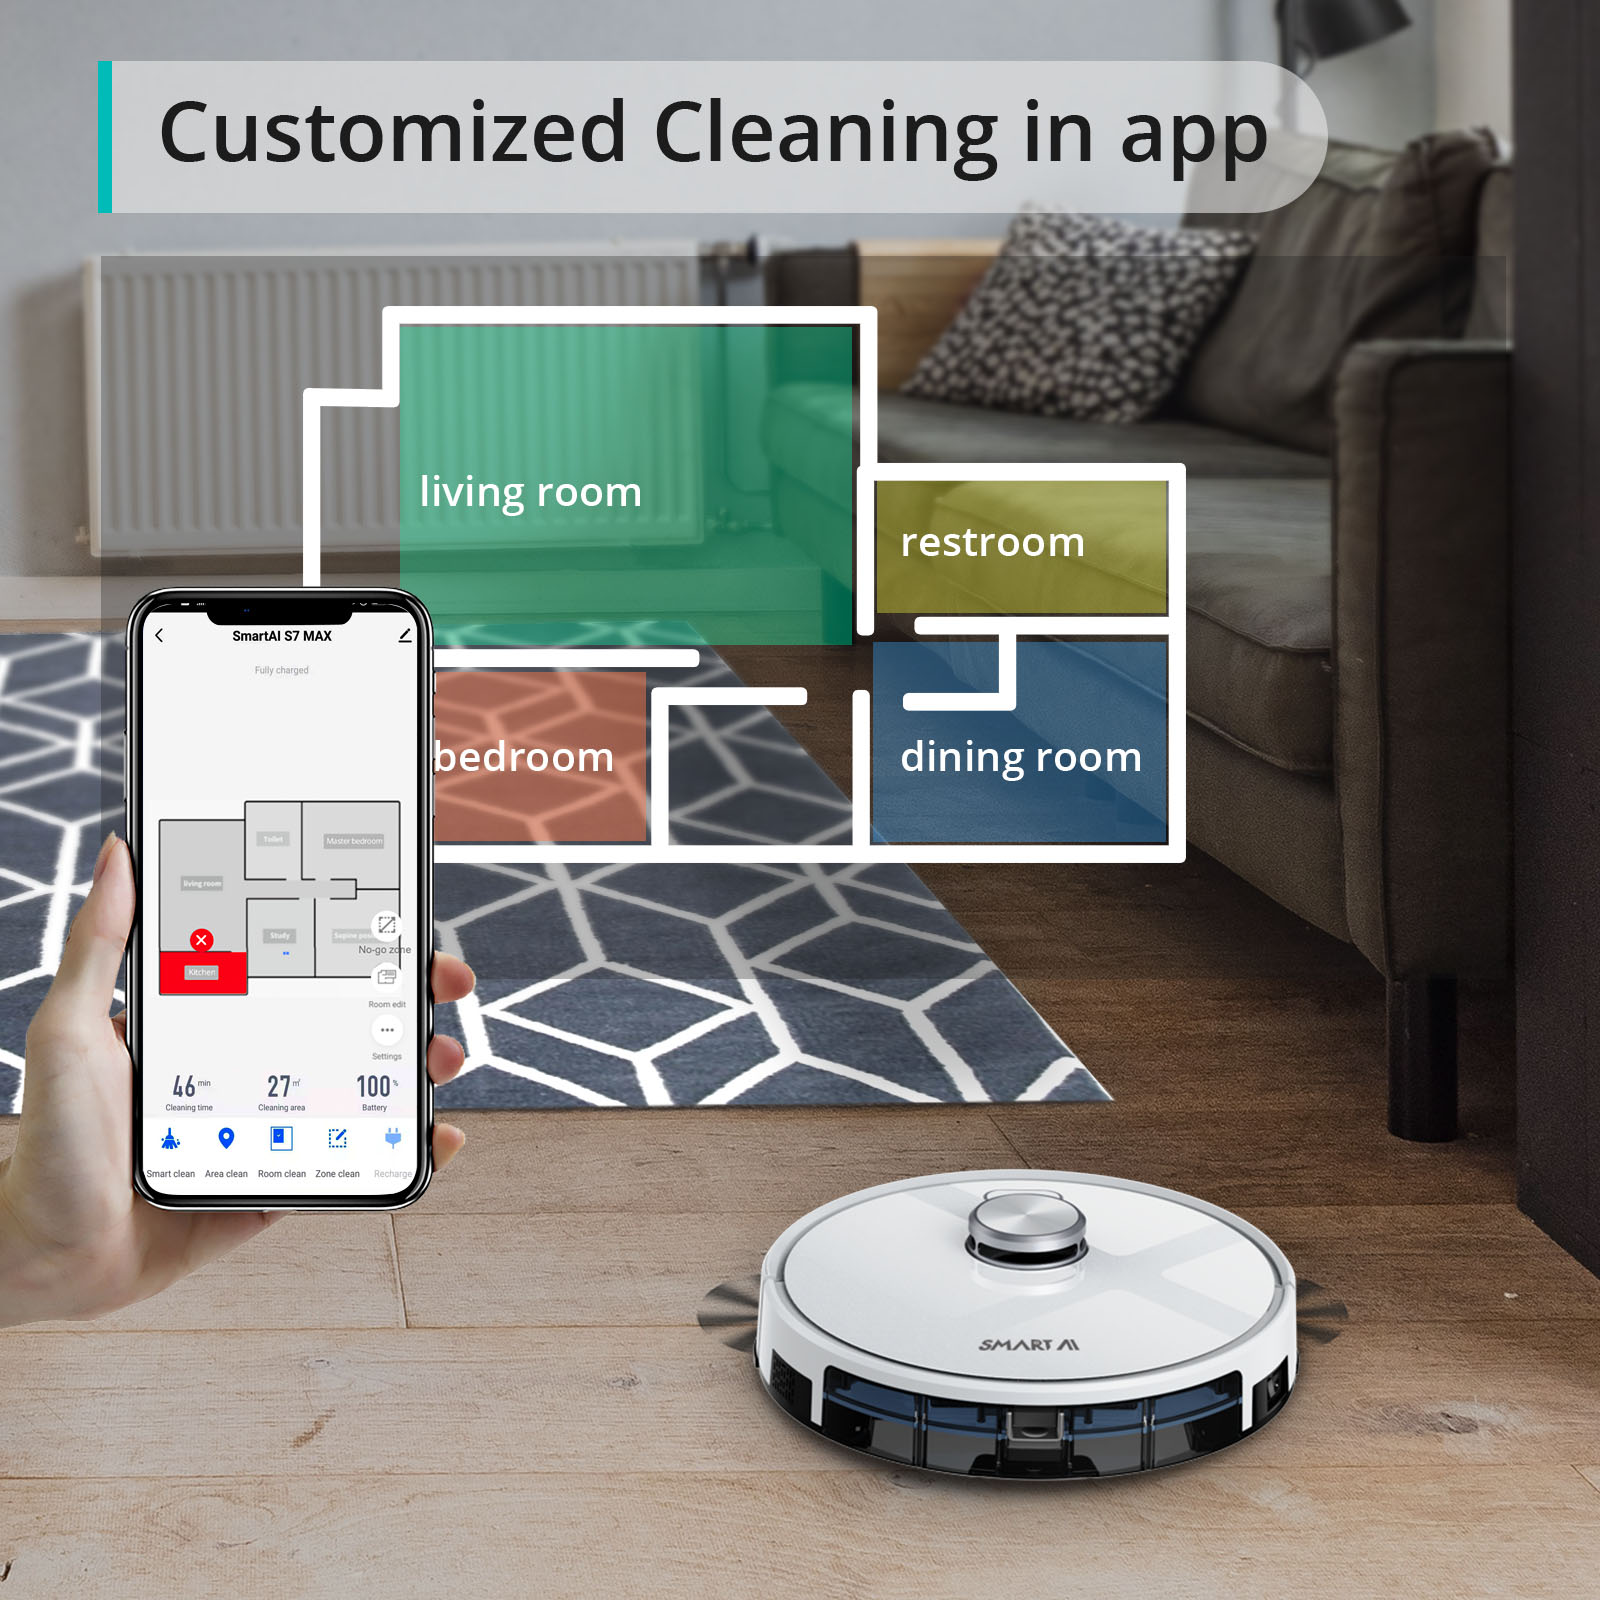 Customized Cleaning in app